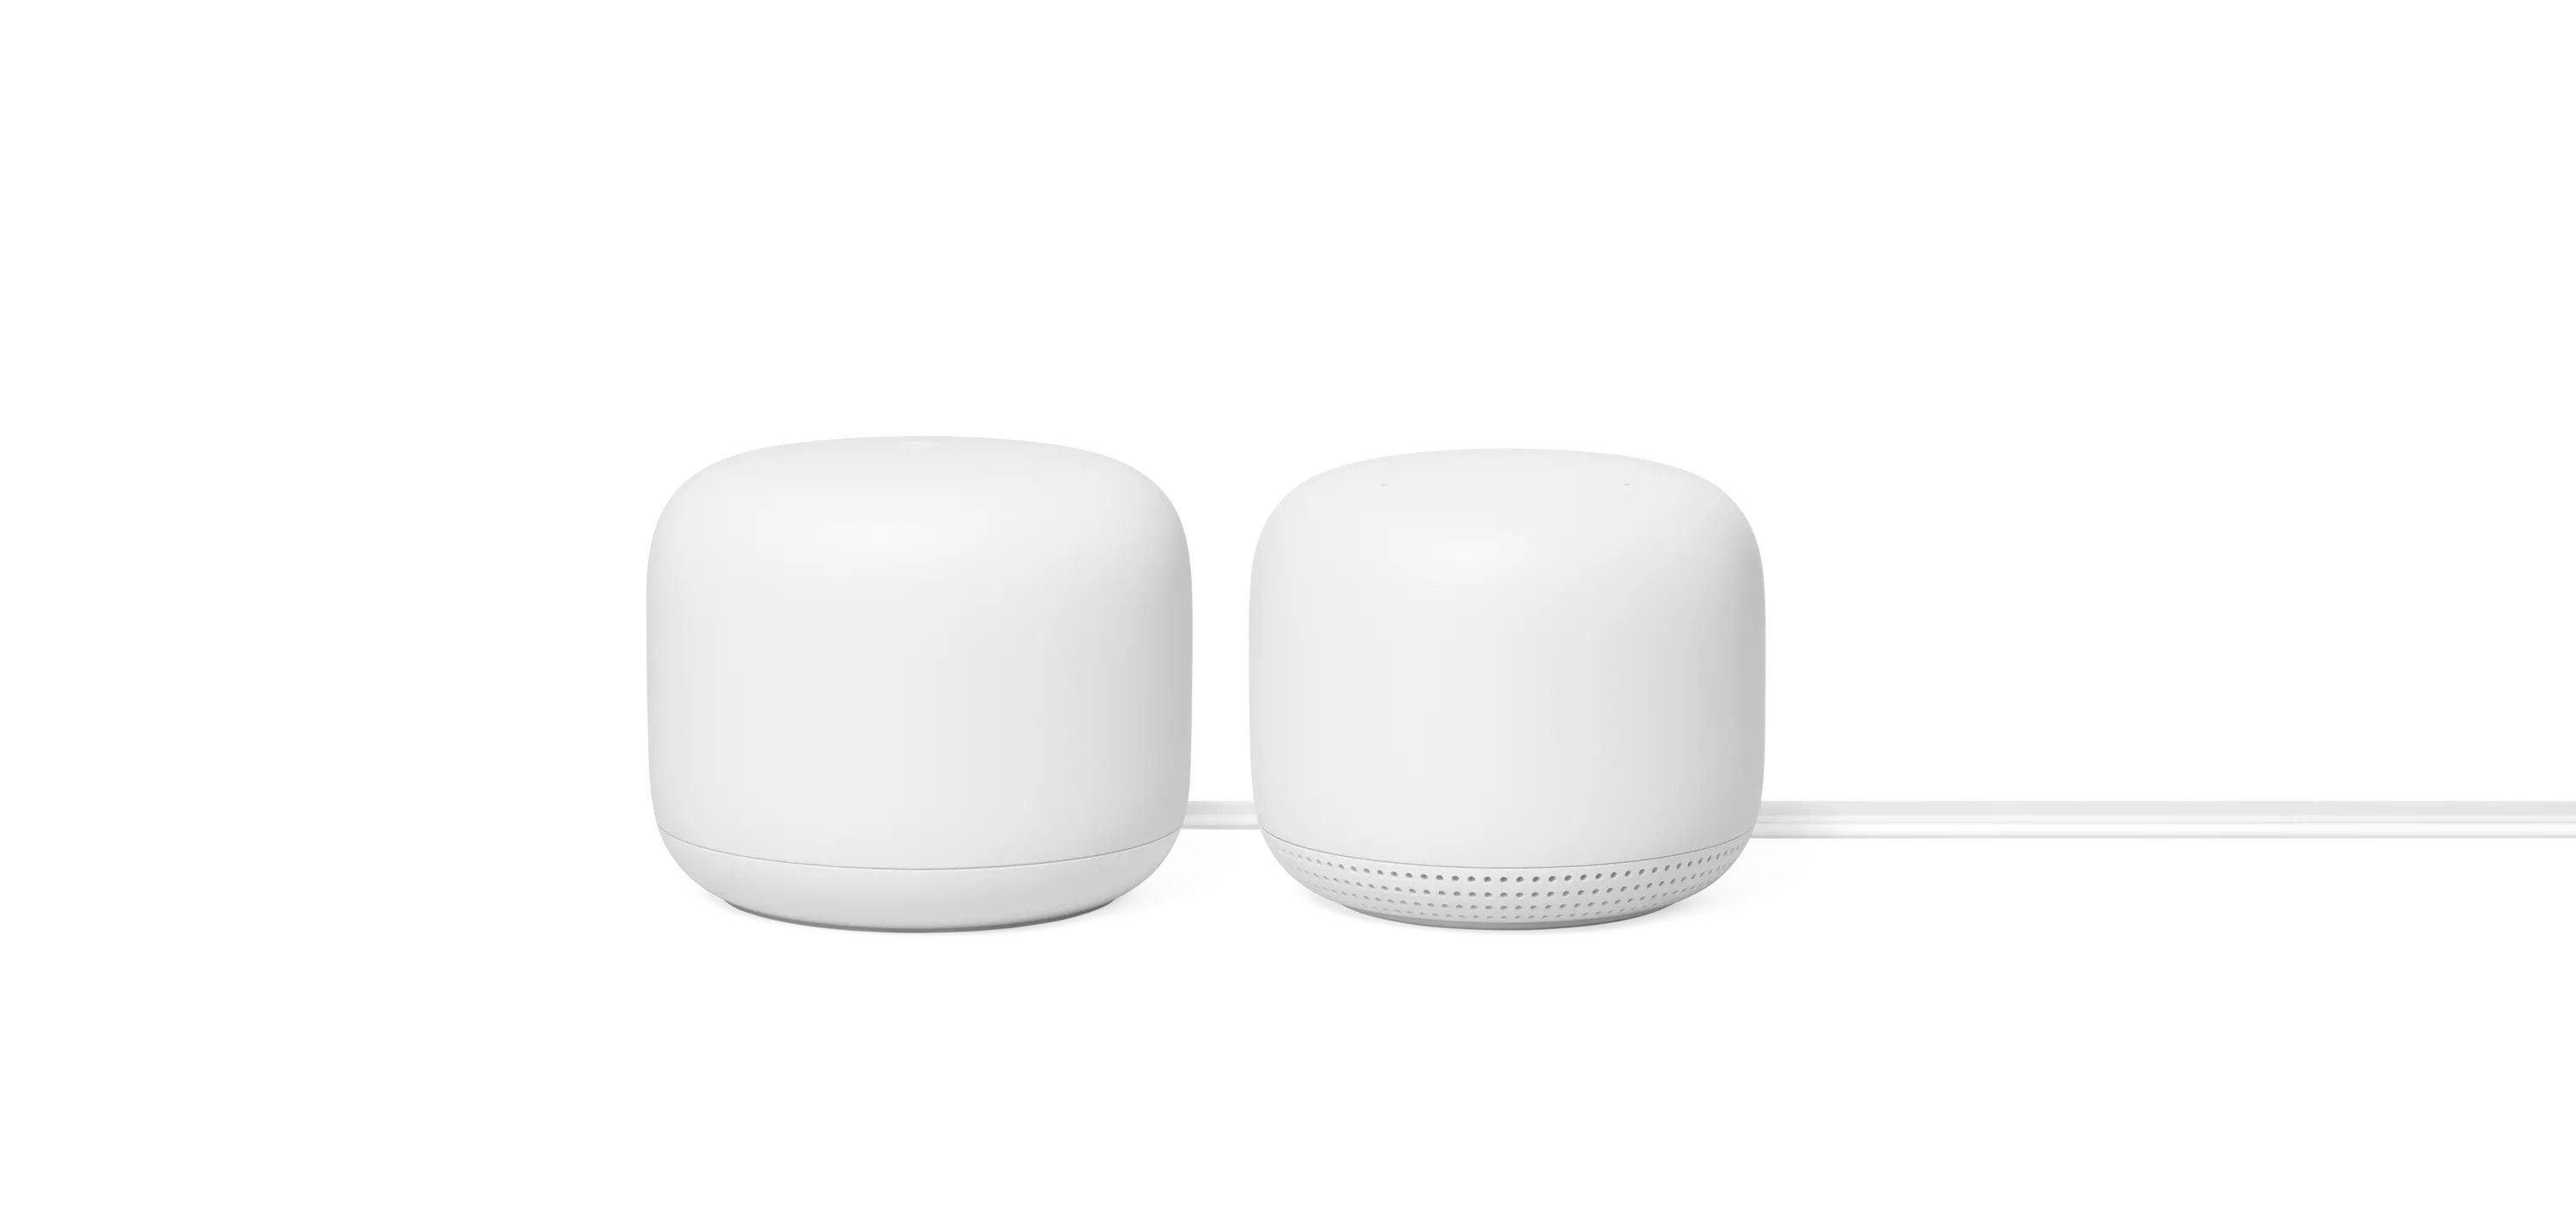 Google Wifi Home Network Wireless Routers for sale